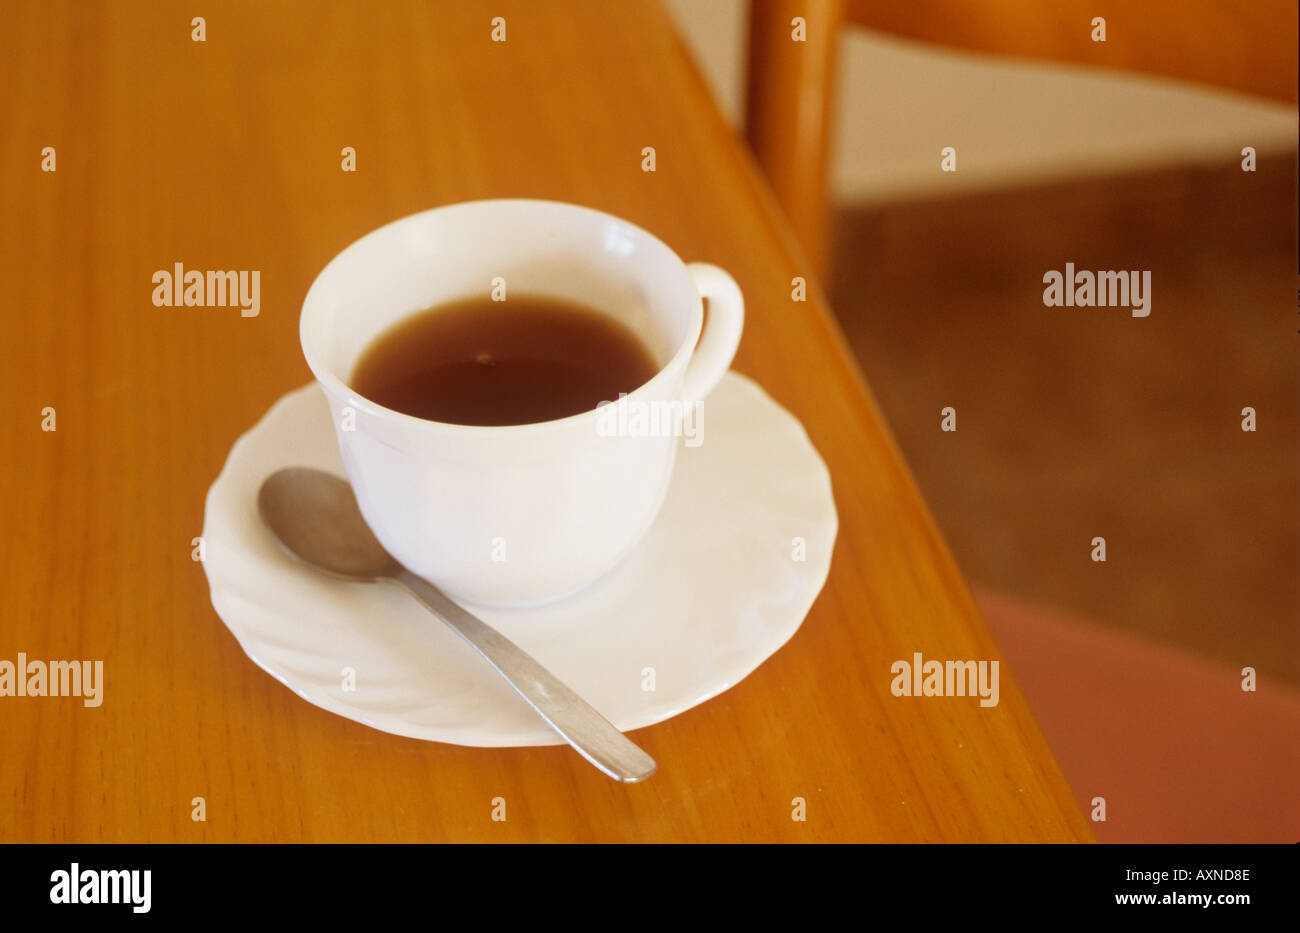 Half full cup of coffee or tea with saucer and teaspoon on a table with an empty chair Stock Photo